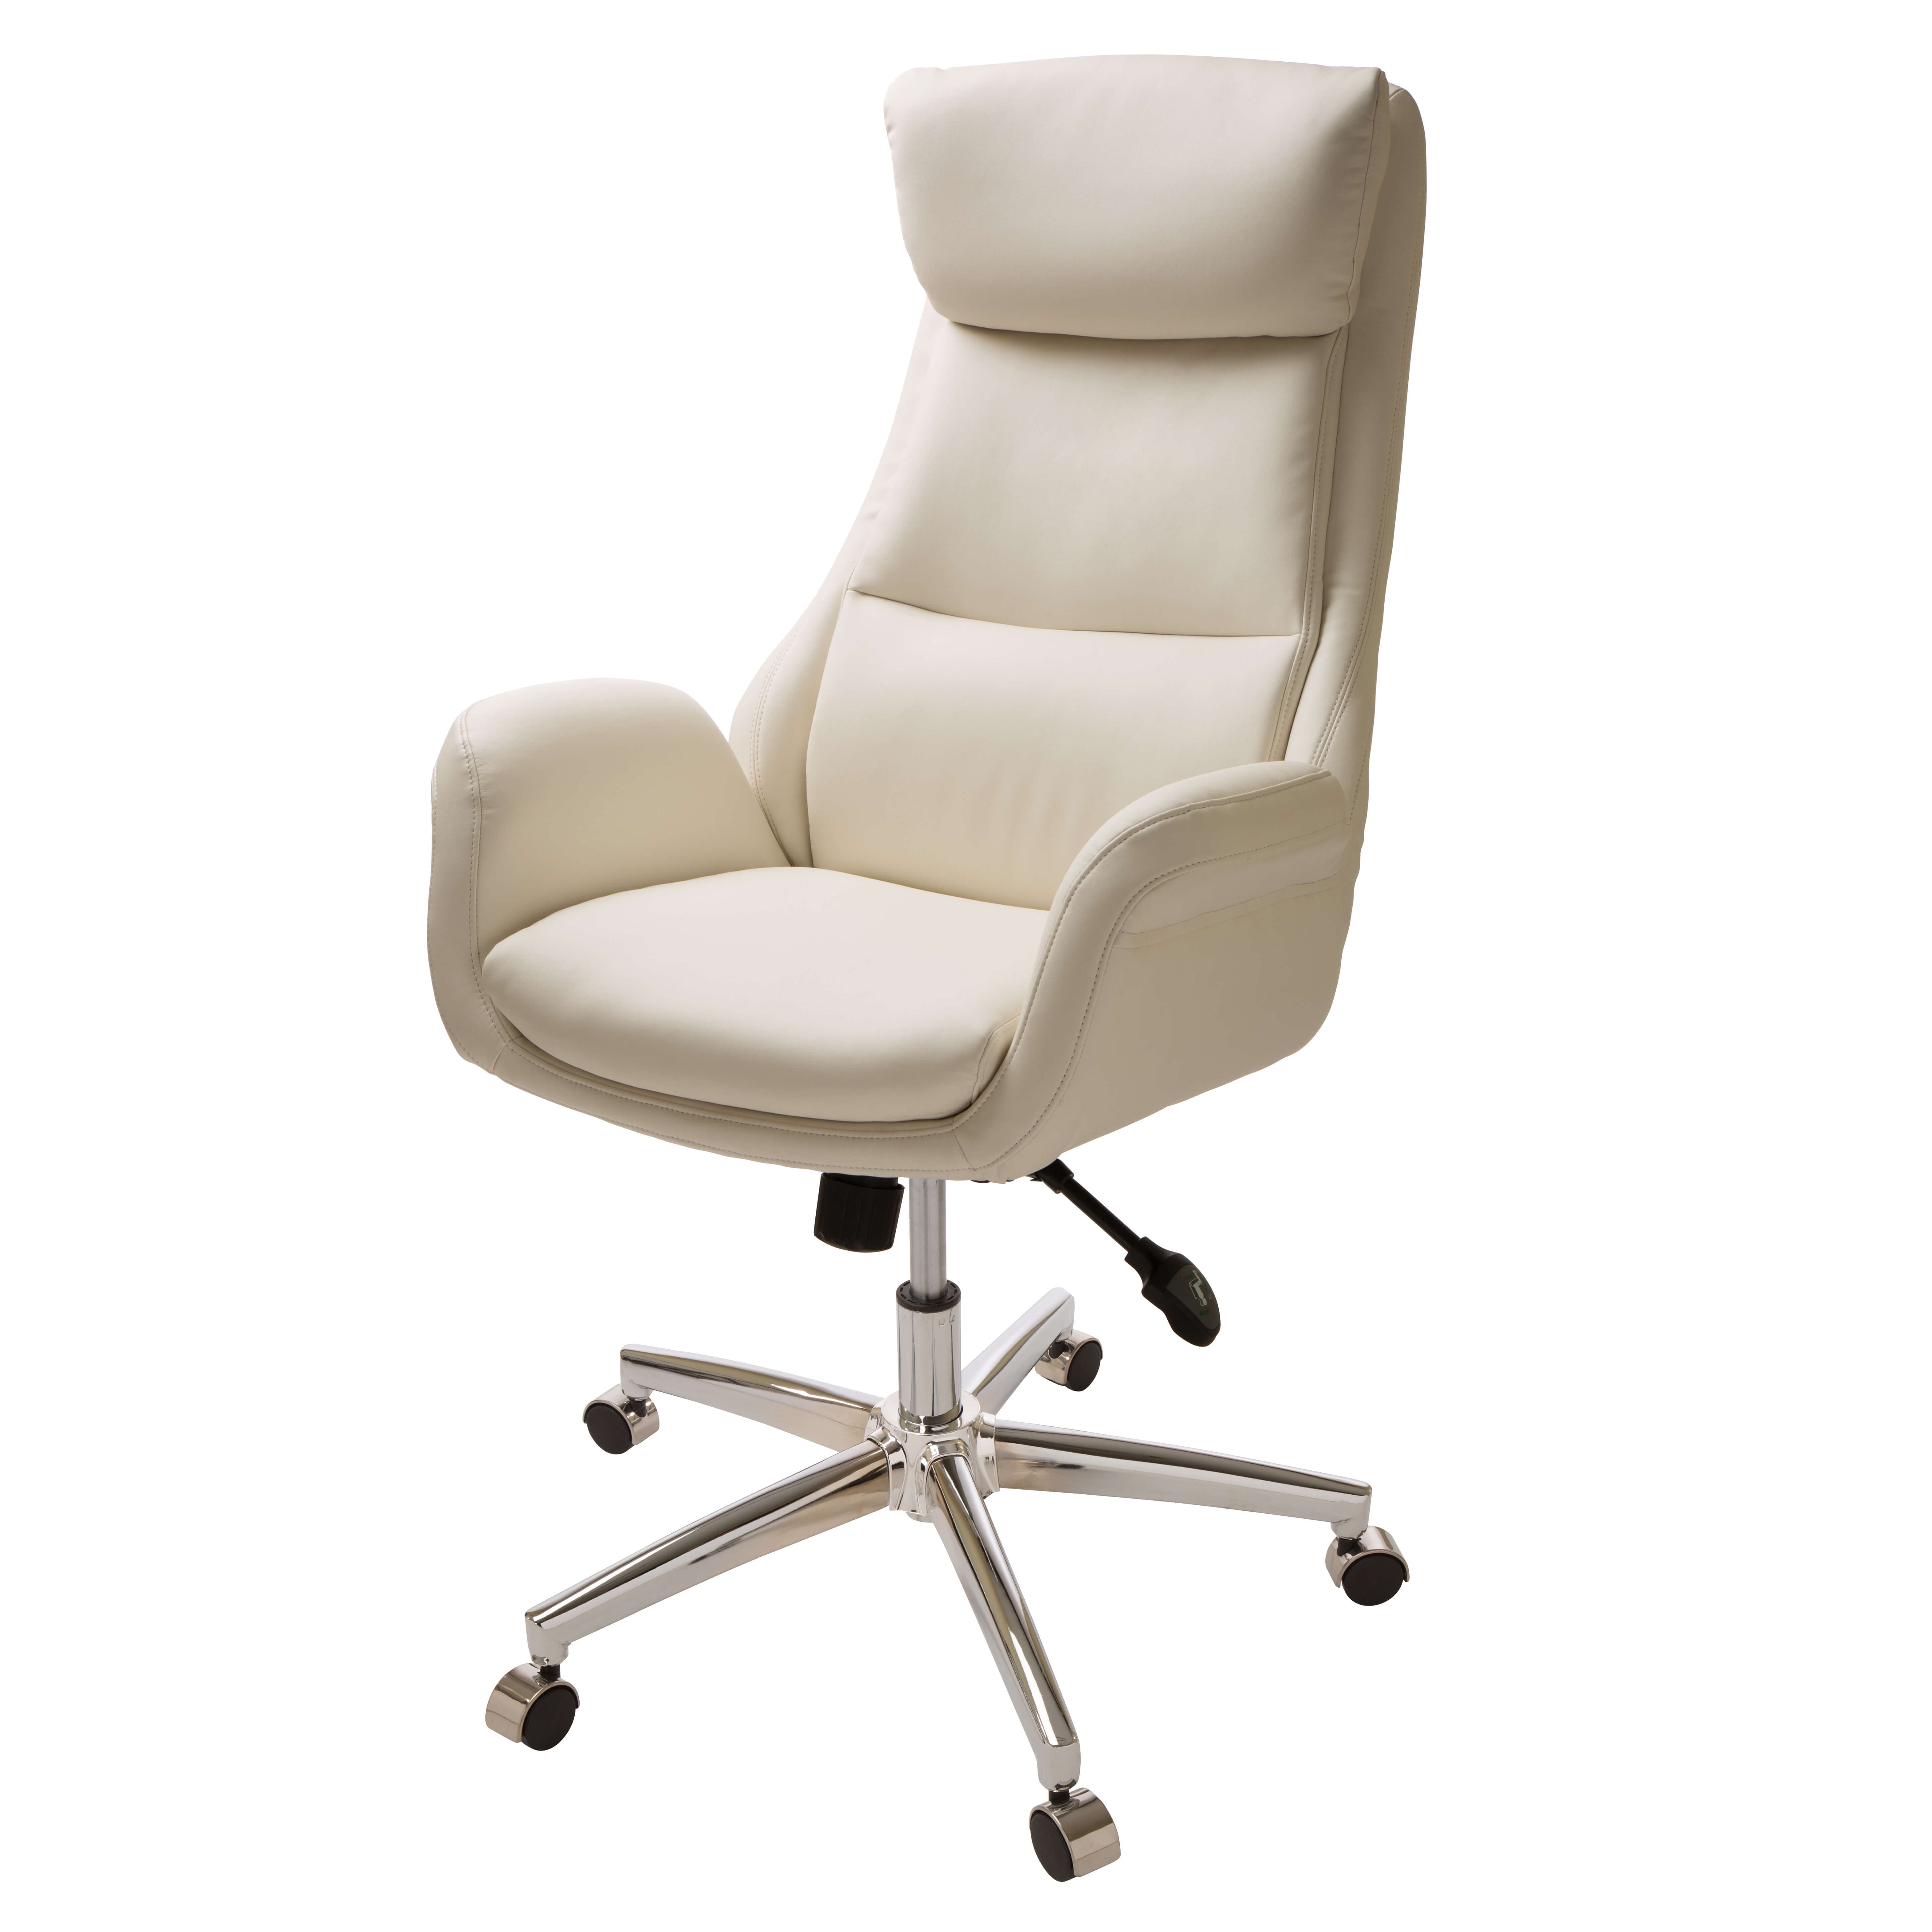 Executive/office pneumatic chair